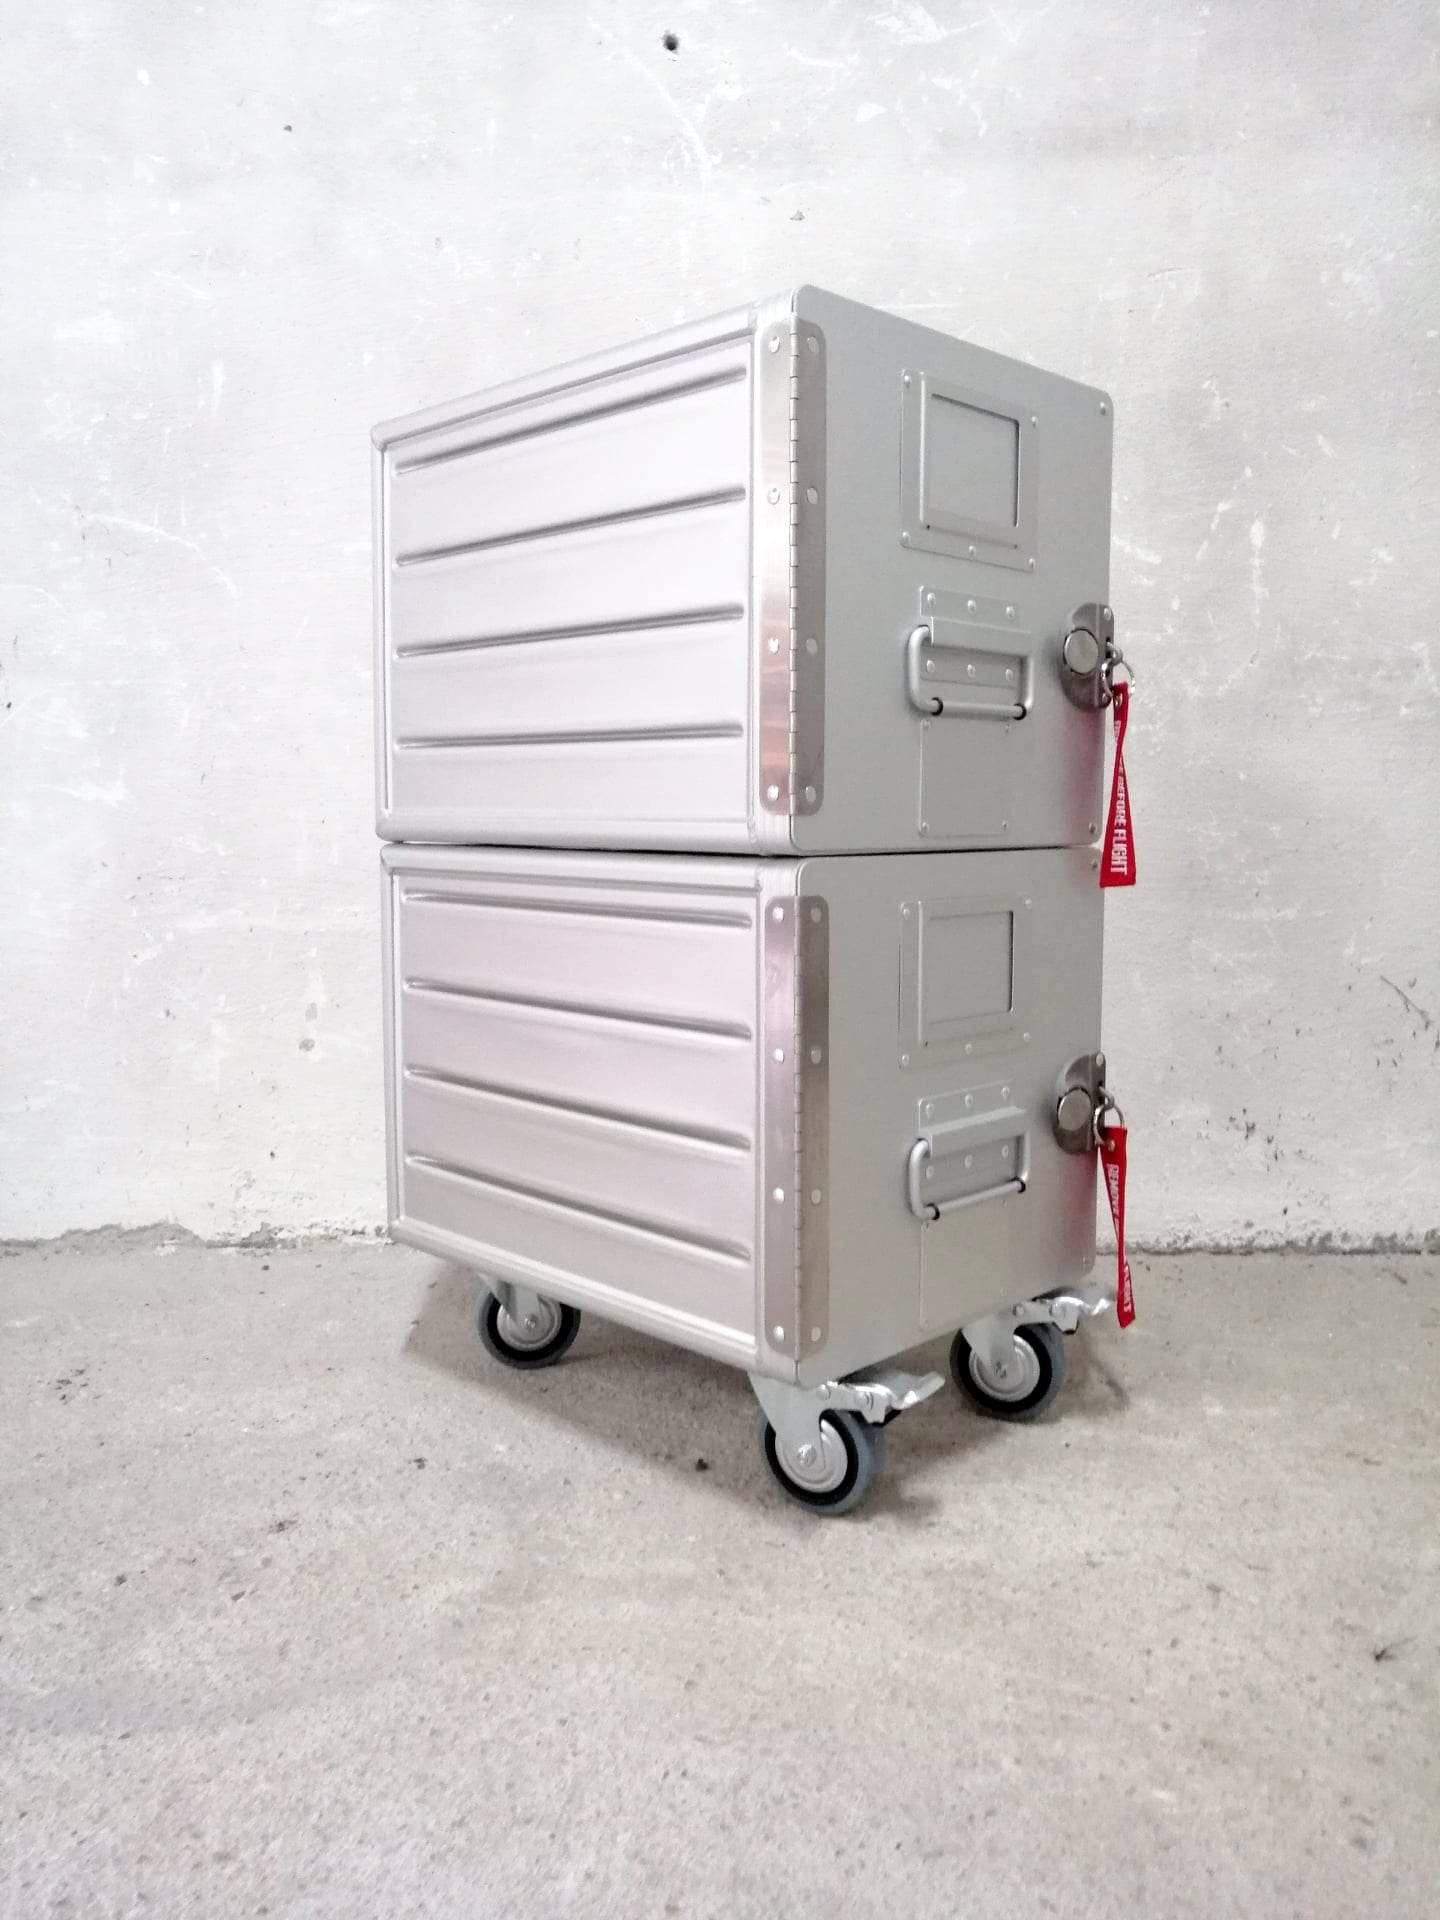 Brand New Aircraft Cabinet, Aviaton Storage Cart, Side Table Made of NEW Airline Galley Boxes Hainan with 4 Drawers, Handmade